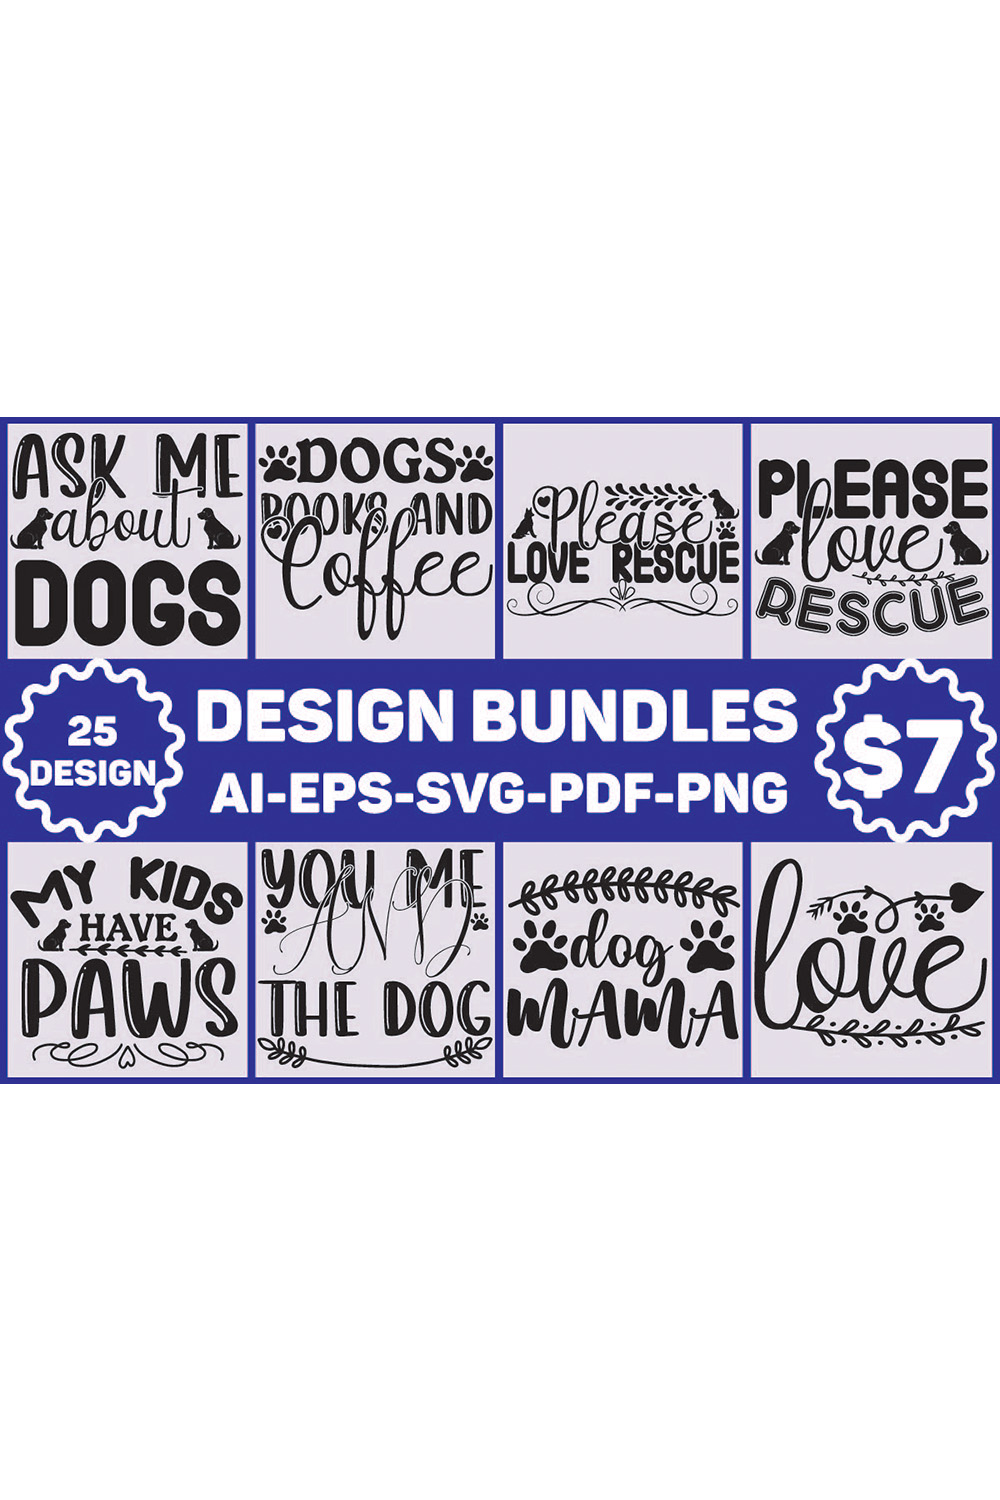 Blue and white sign that says design bundles $ 7 99.